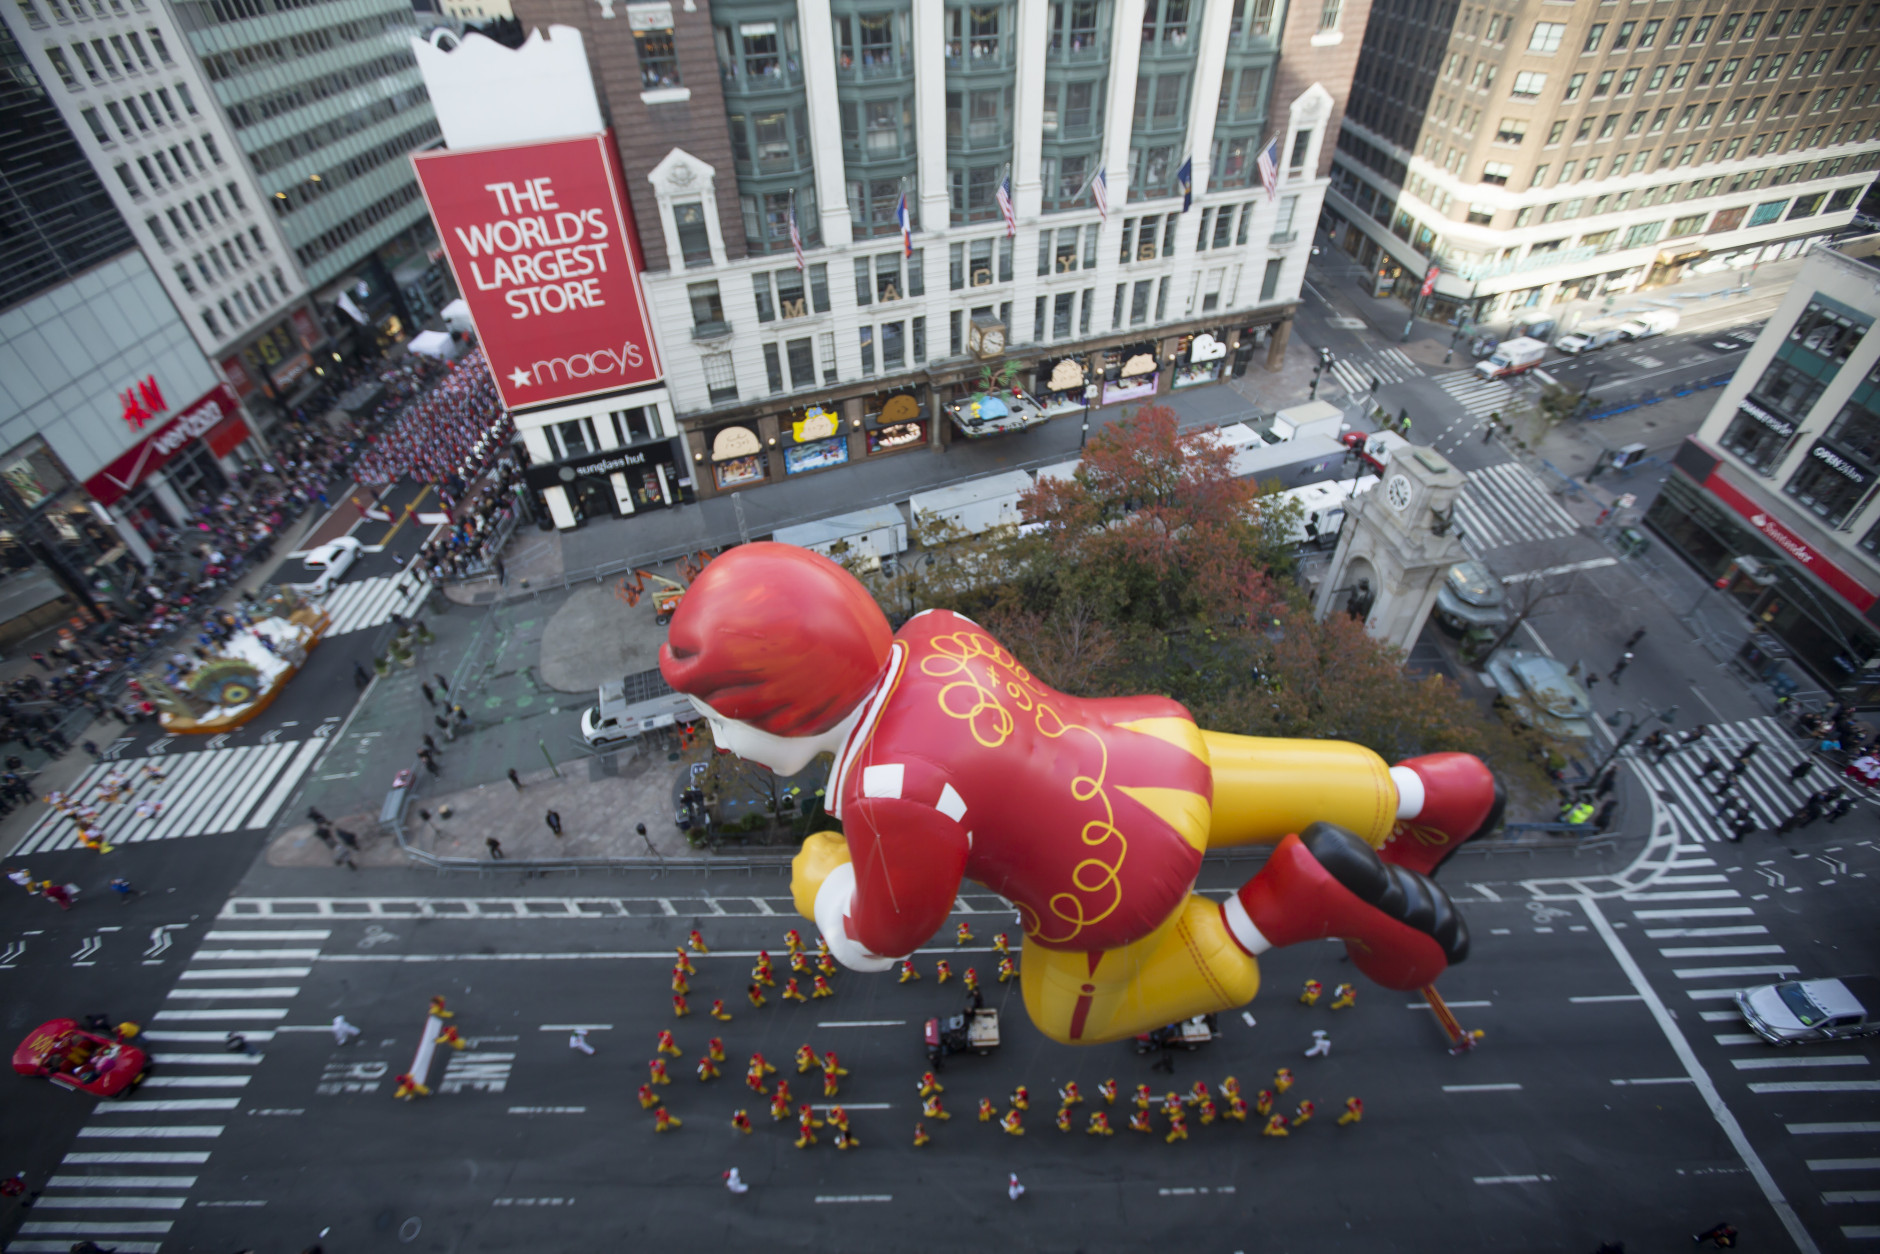 The Ronald McDonald balloon goes down 6th Avenue for the 89th annual Macy's Thanksgiving Day Parade as seen from above street level on Thursday, Nov. 26, 2015, in New York. (Photo by Ben Hider/Invision/AP)